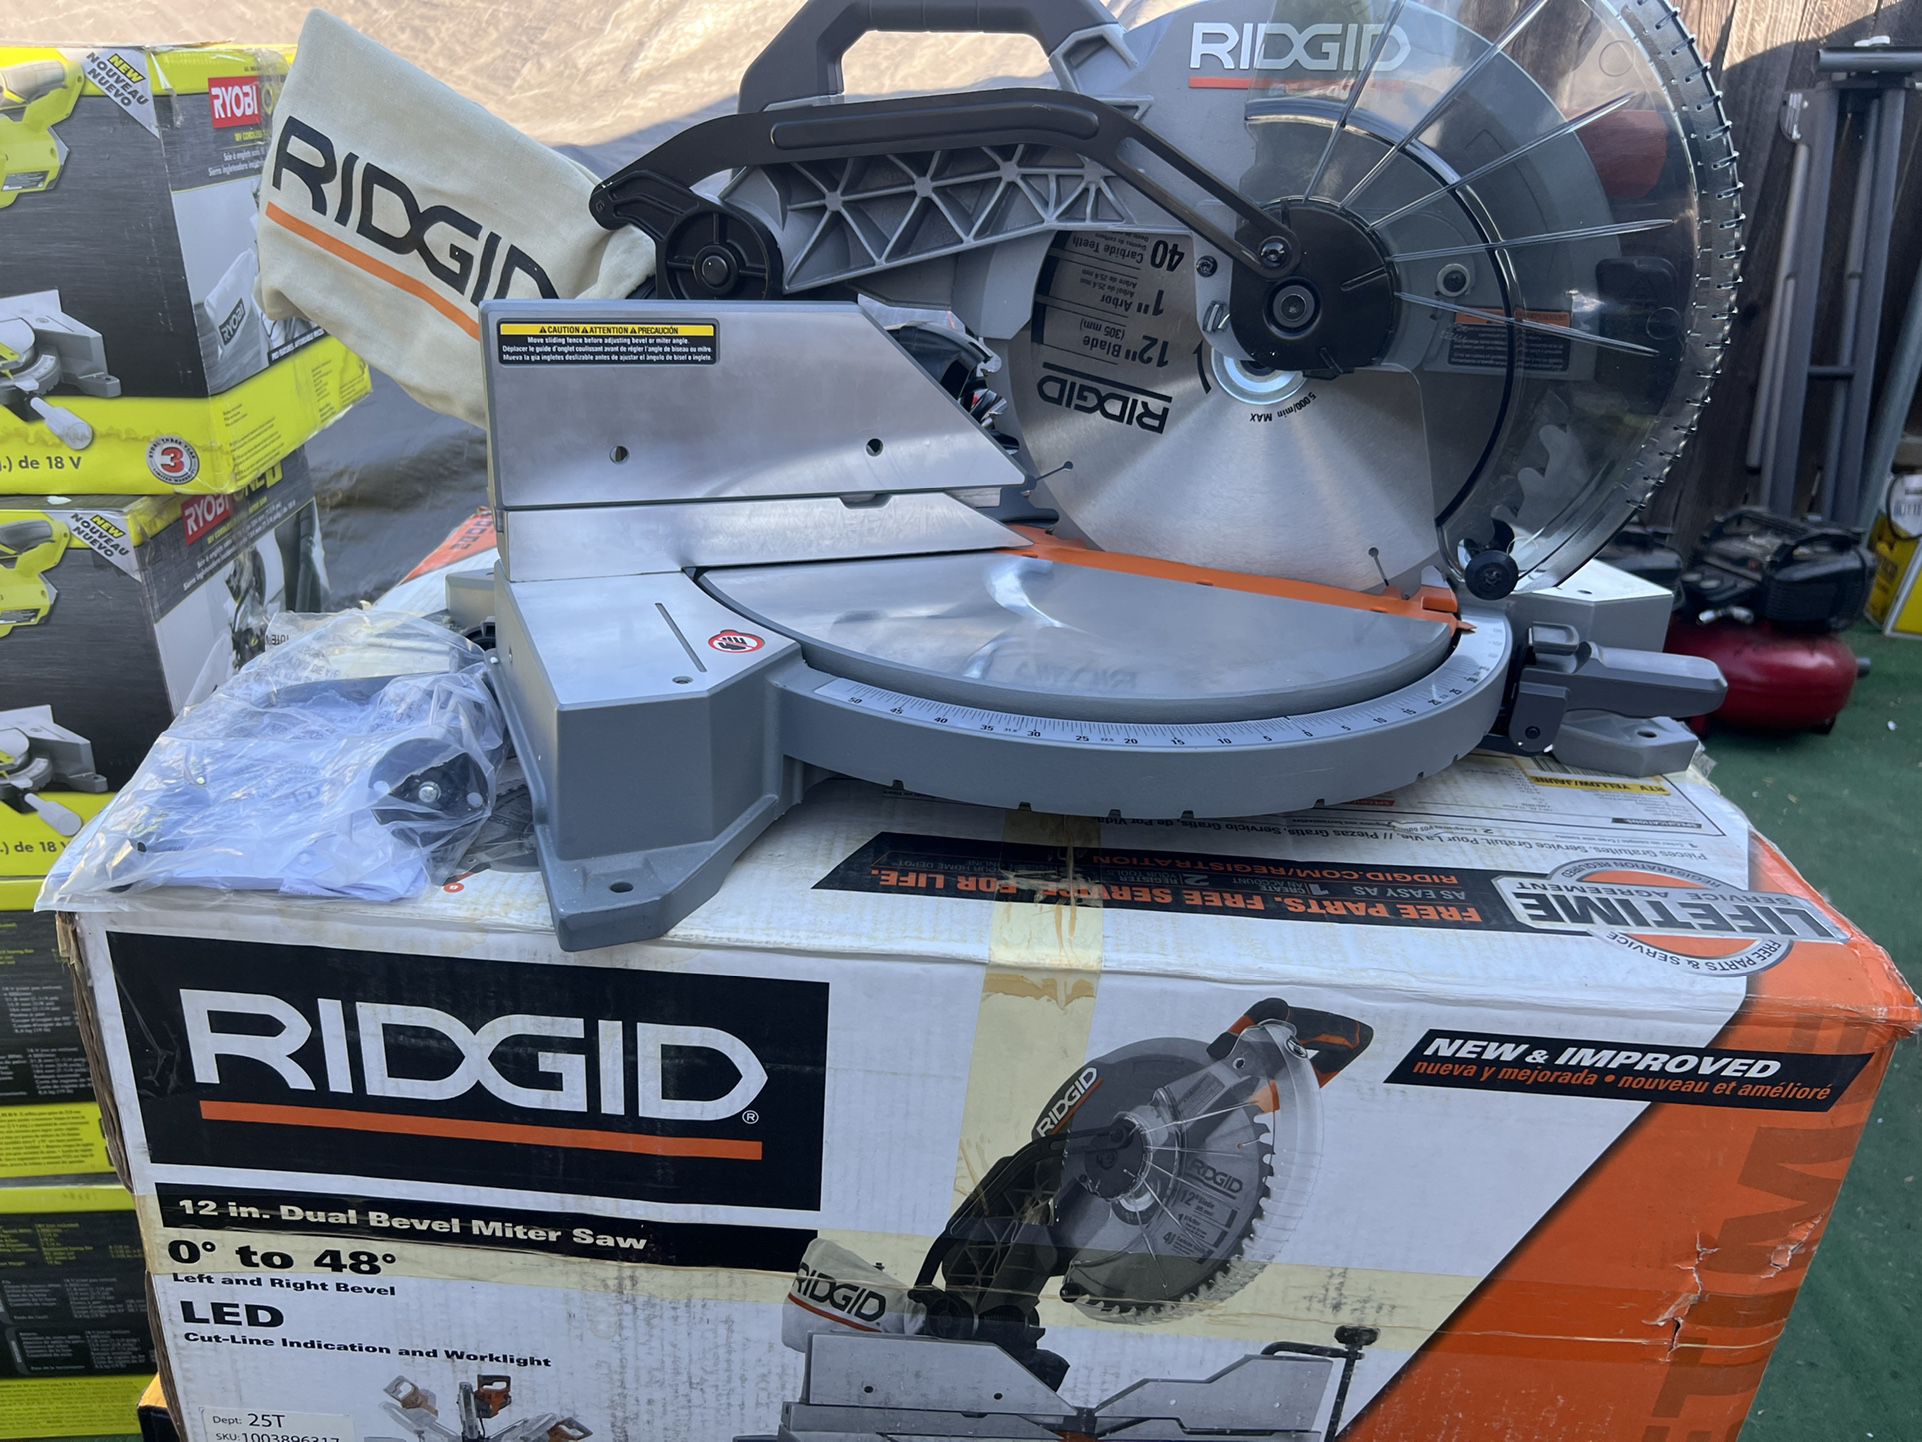 RIDGID 15 Amp Corded 12 in. Dual Bevel Miter Saw with LED Cutline Indicator  for Sale in La Habra Heights, CA OfferUp